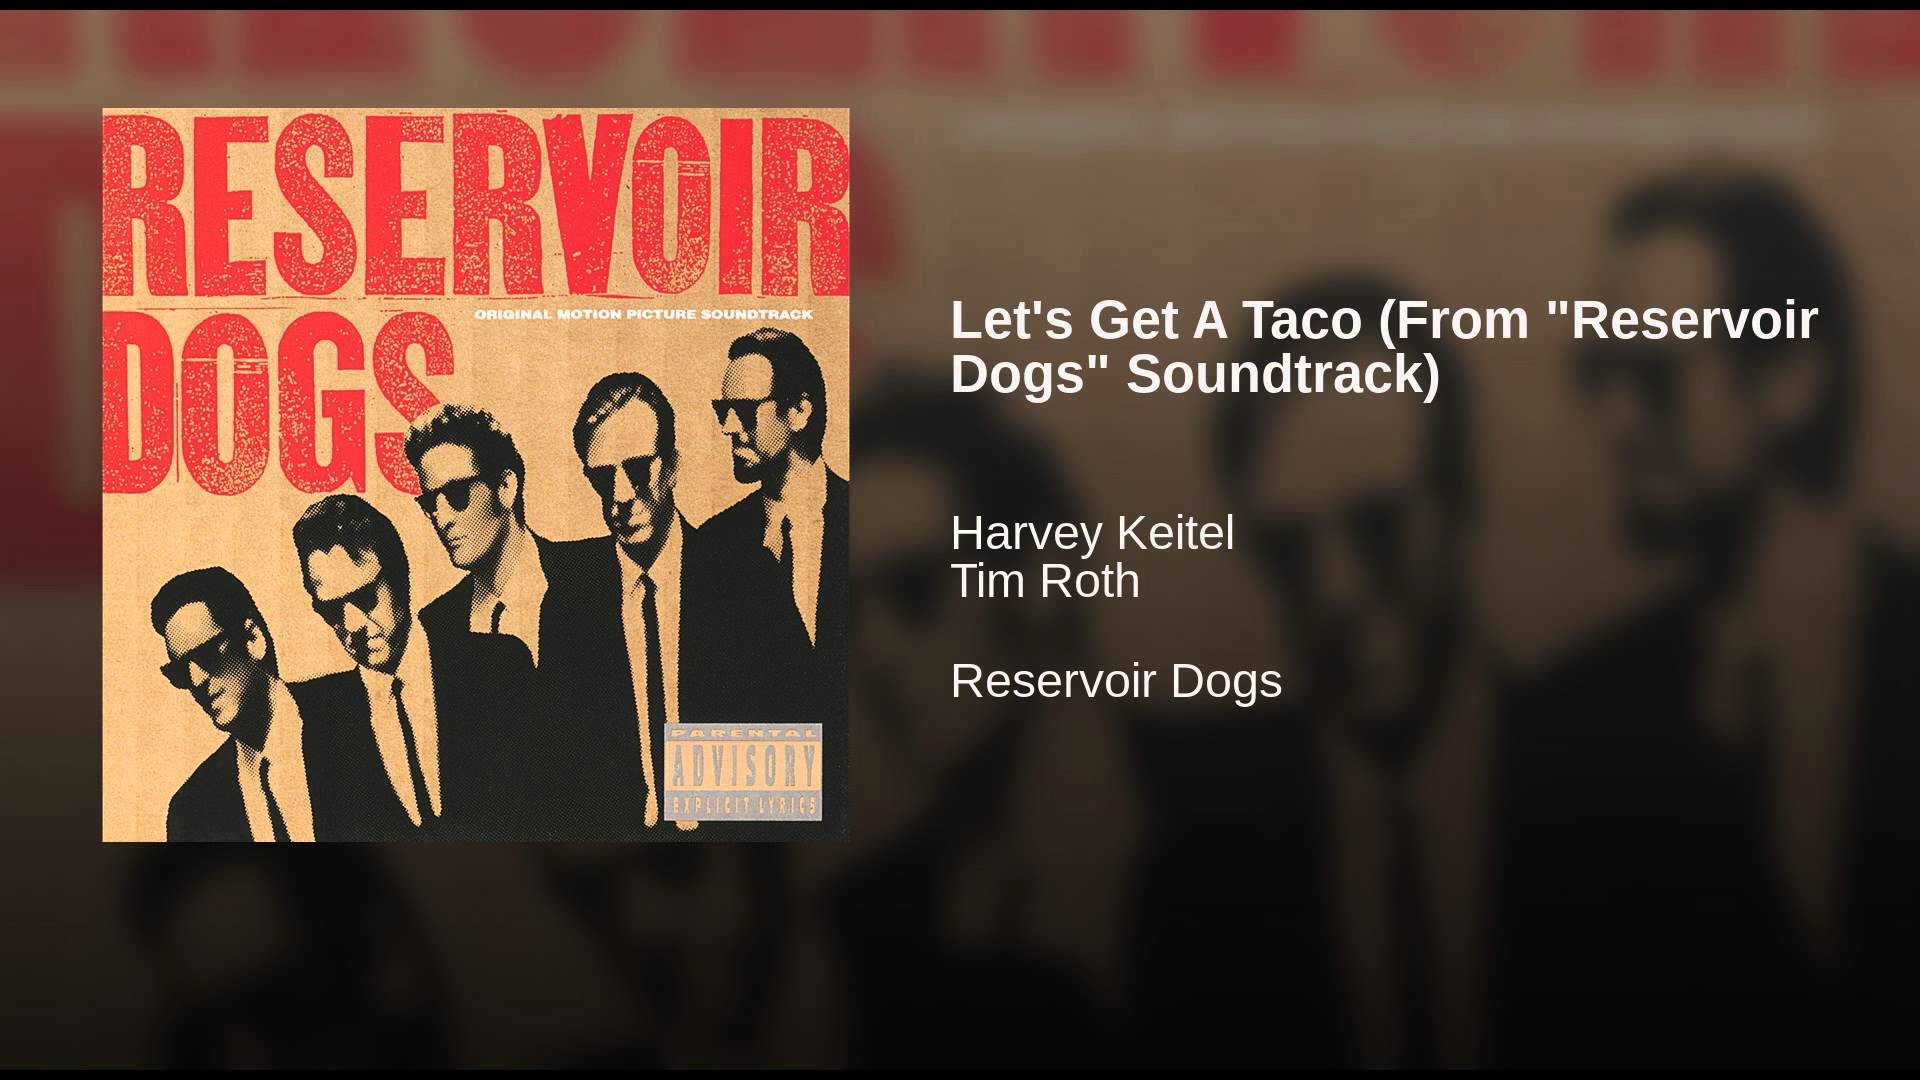 1920x1080 Let's Get A Taco (From "Reservoir Dogs" Soundtrack)